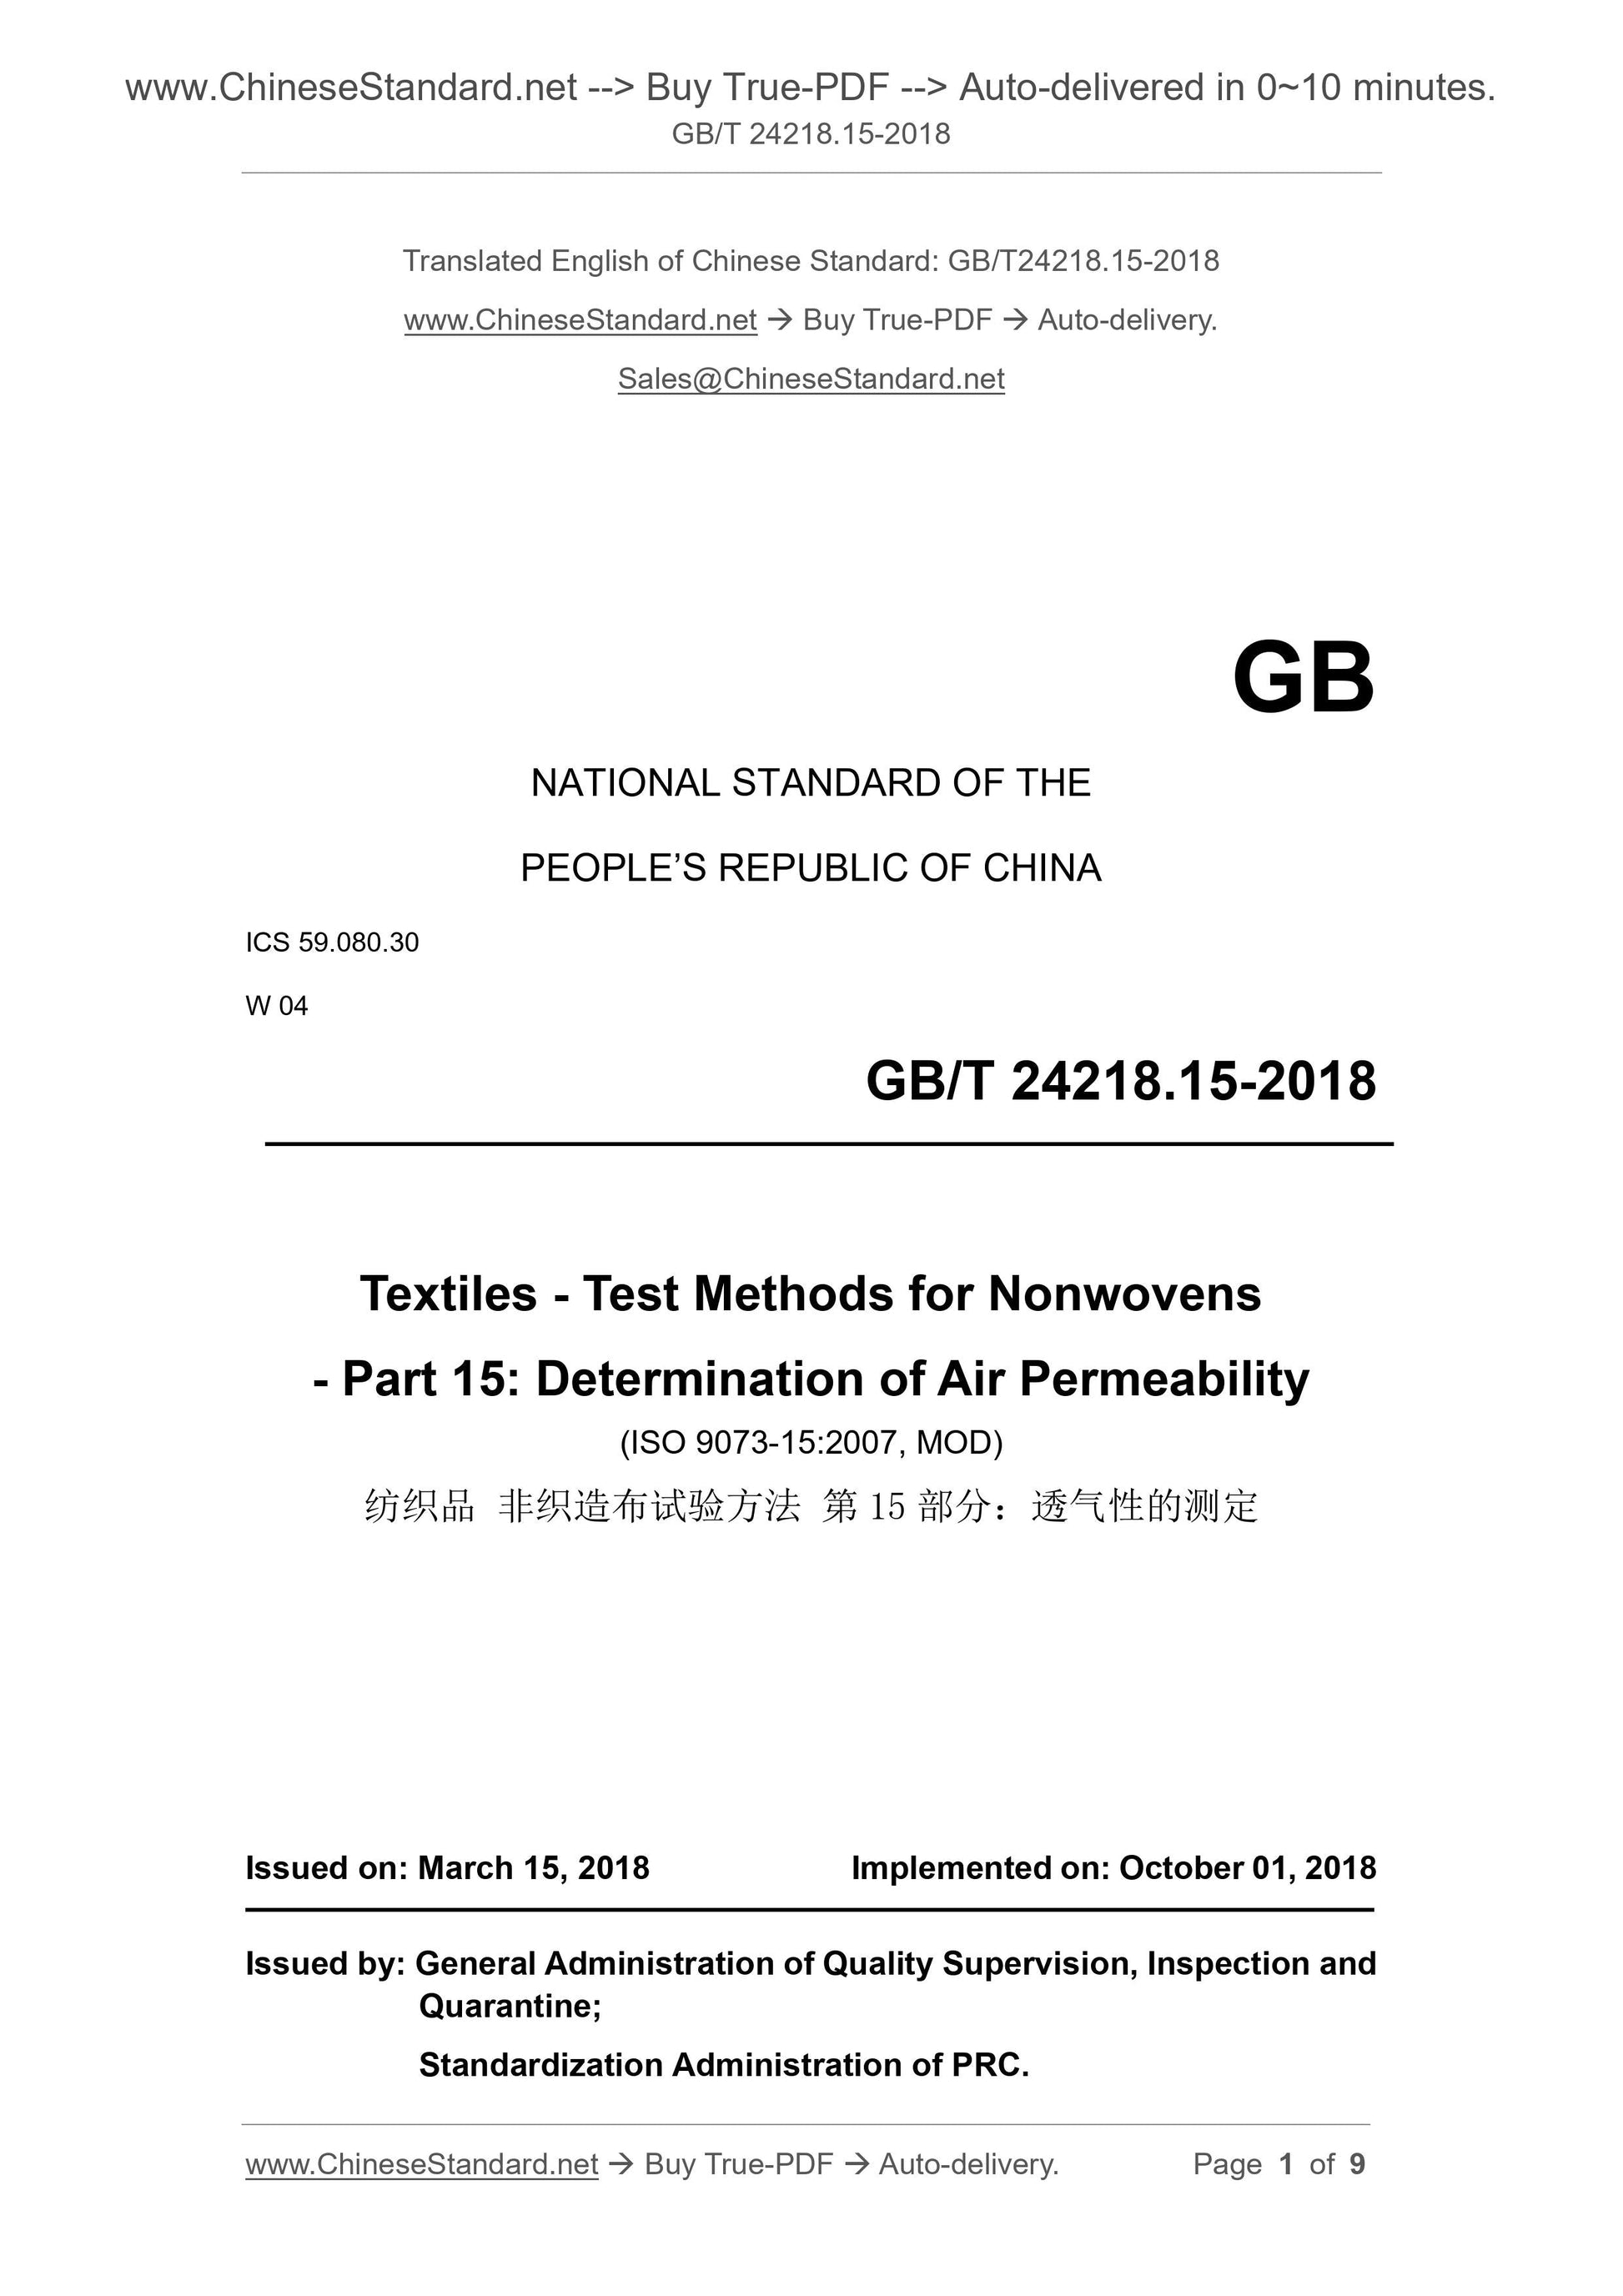 GB/T 24218.15-2018 Page 1